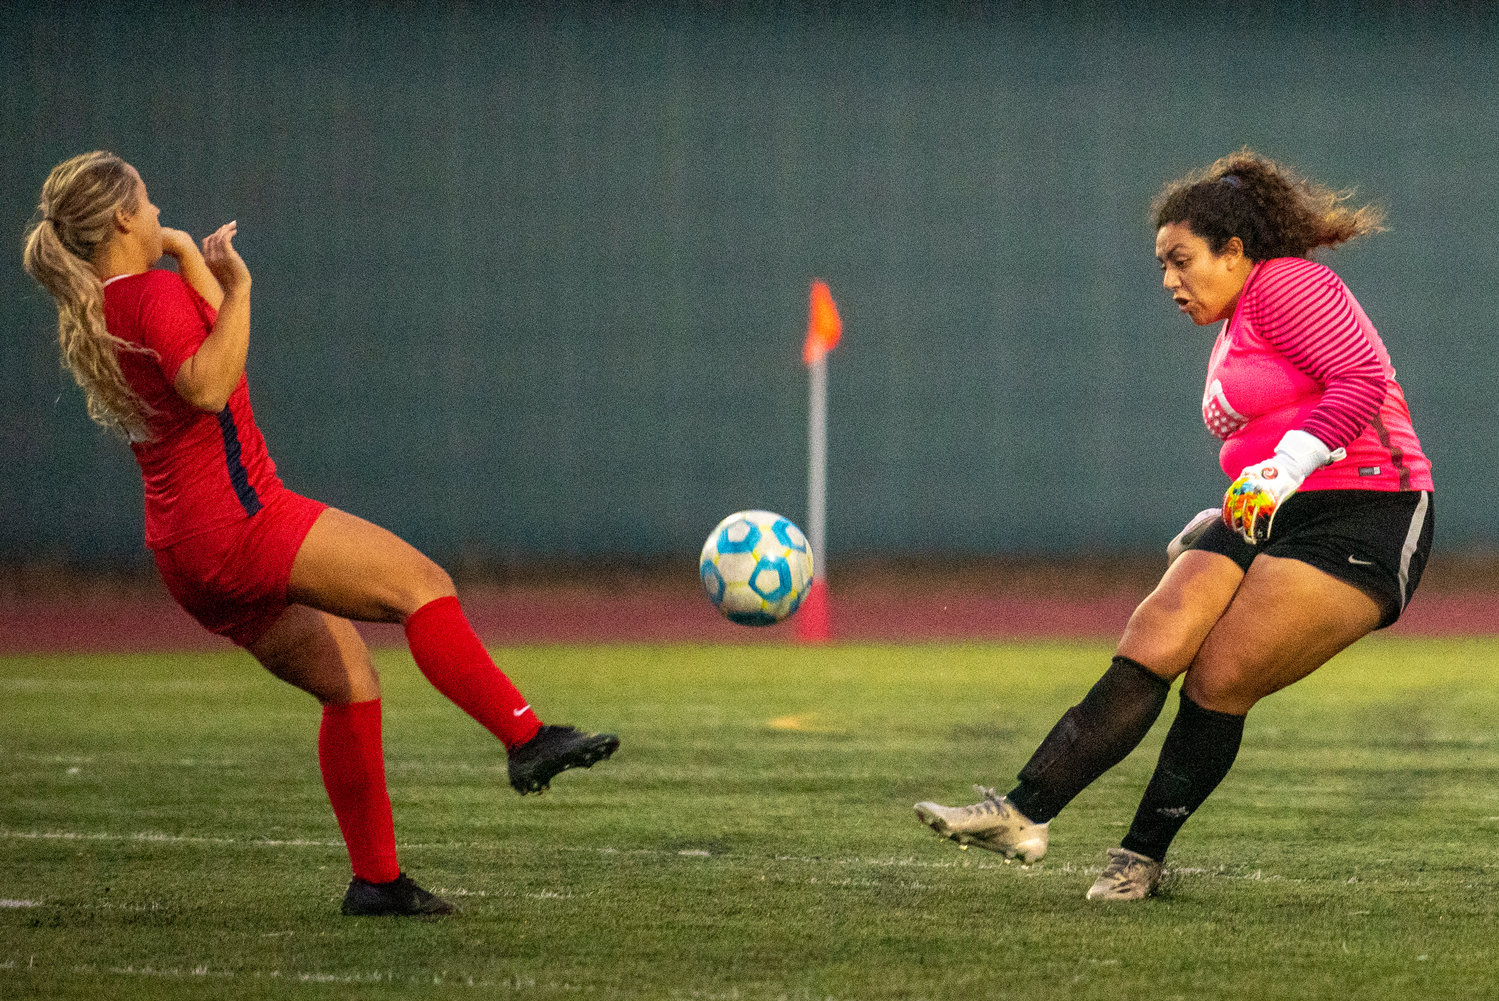 Centralia College keeper Marisol Vargas, right, clears the ball against Lower Columbia College on Wednesday.